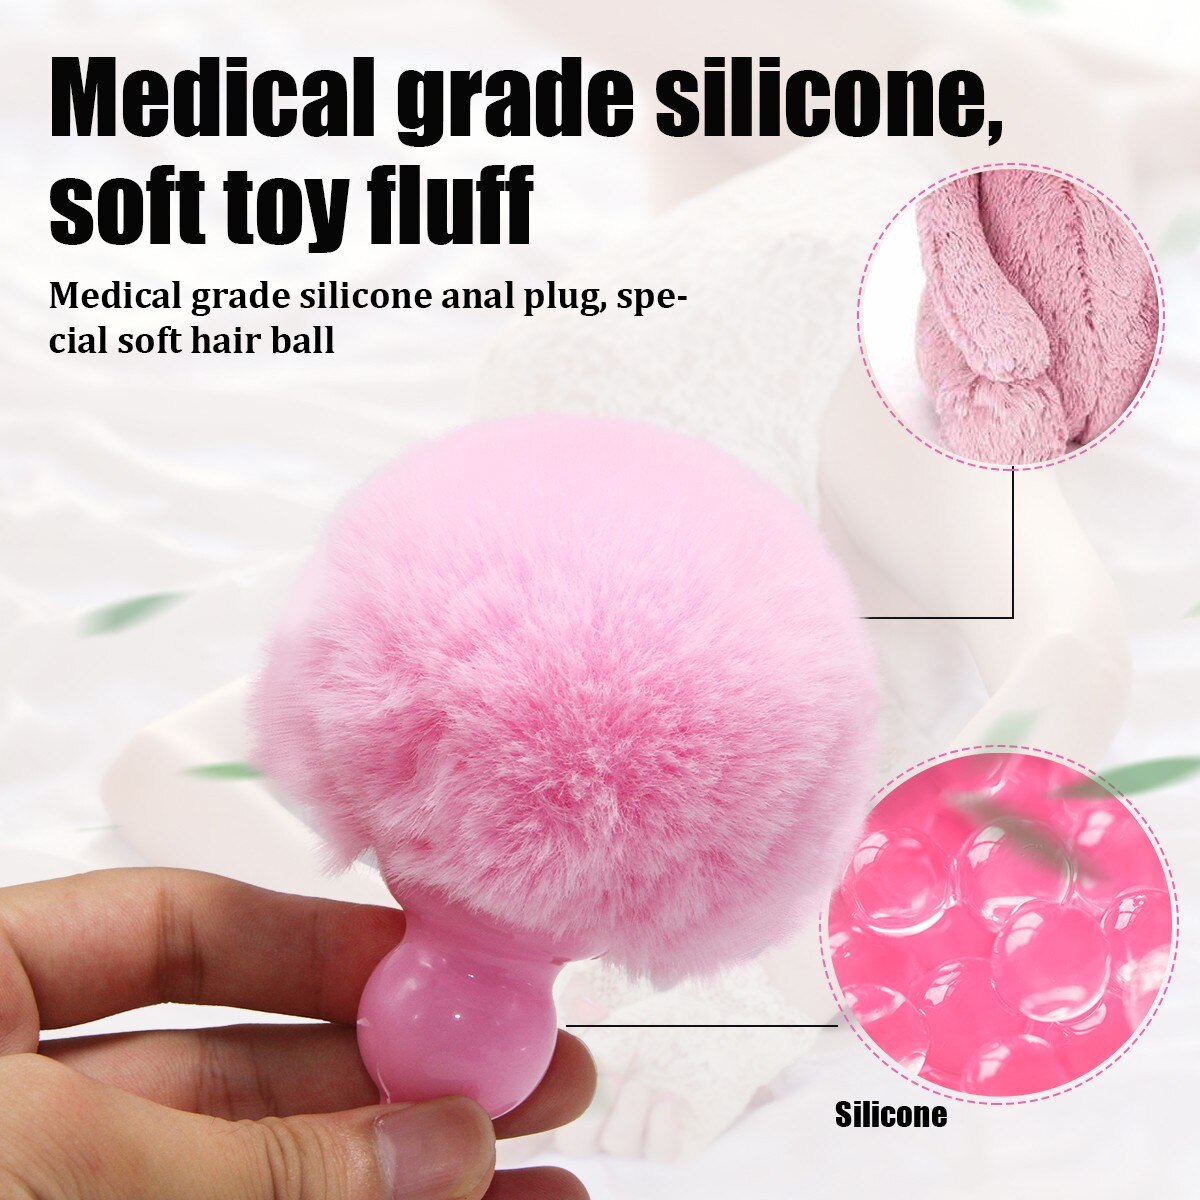 Silicone Anal Plug Plush Rabbit Tail Sex Toy for Women Men Gay Sexy Butt Plug Prostate Massager Tail Anal Plug Erotic Role Play